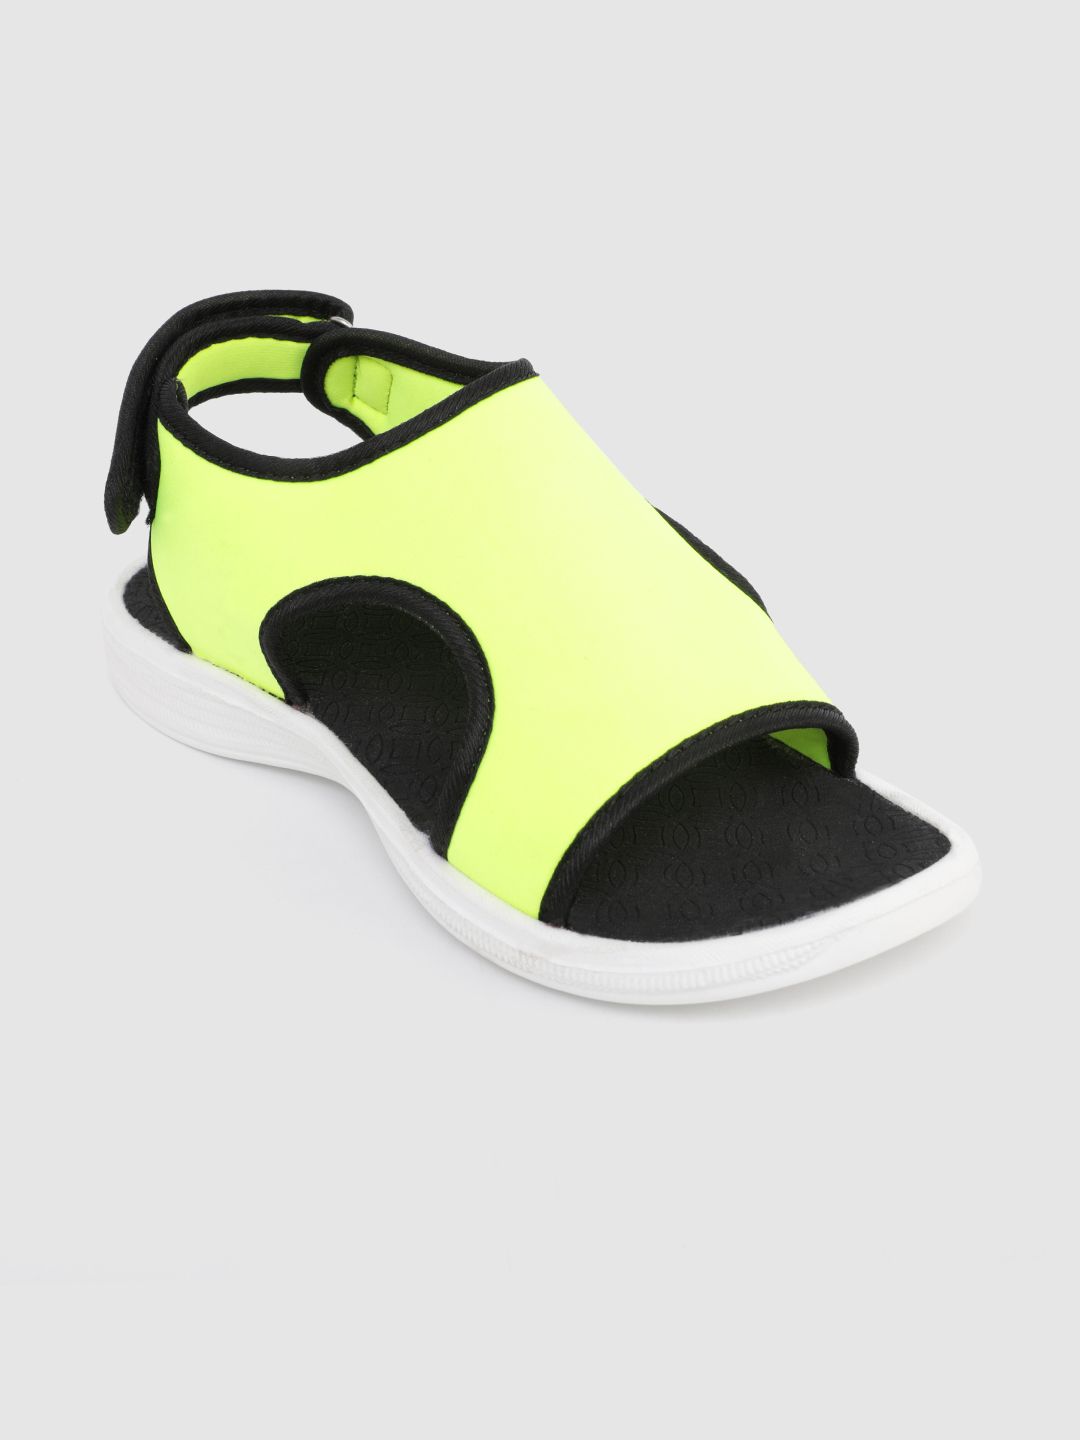 Kook N Keech Women Yellow Solid Sports Sandals with Cut-Out Detail Price in India